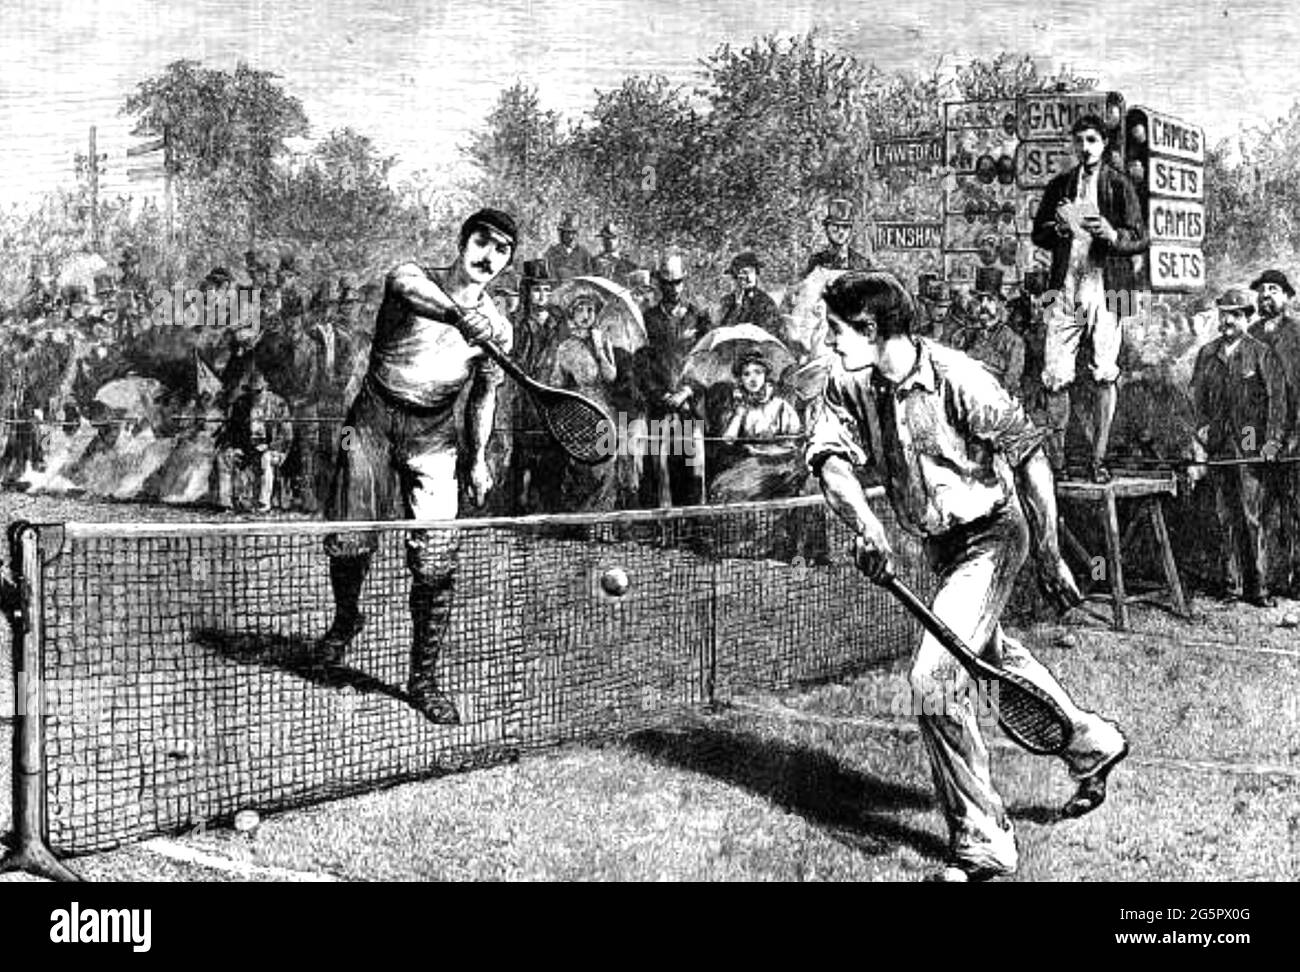 WILLIAM RENSHAW (1861-1904) English tennis player who won twelve major titles during his career including seven Wimbledon singles titles. Renshaw is at left in this Graphic magazine engraving of his 1881 clash with Herbert Lawford in the 5th round at Wimbledon. Renshaw went on to win the singles title. Stock Photo